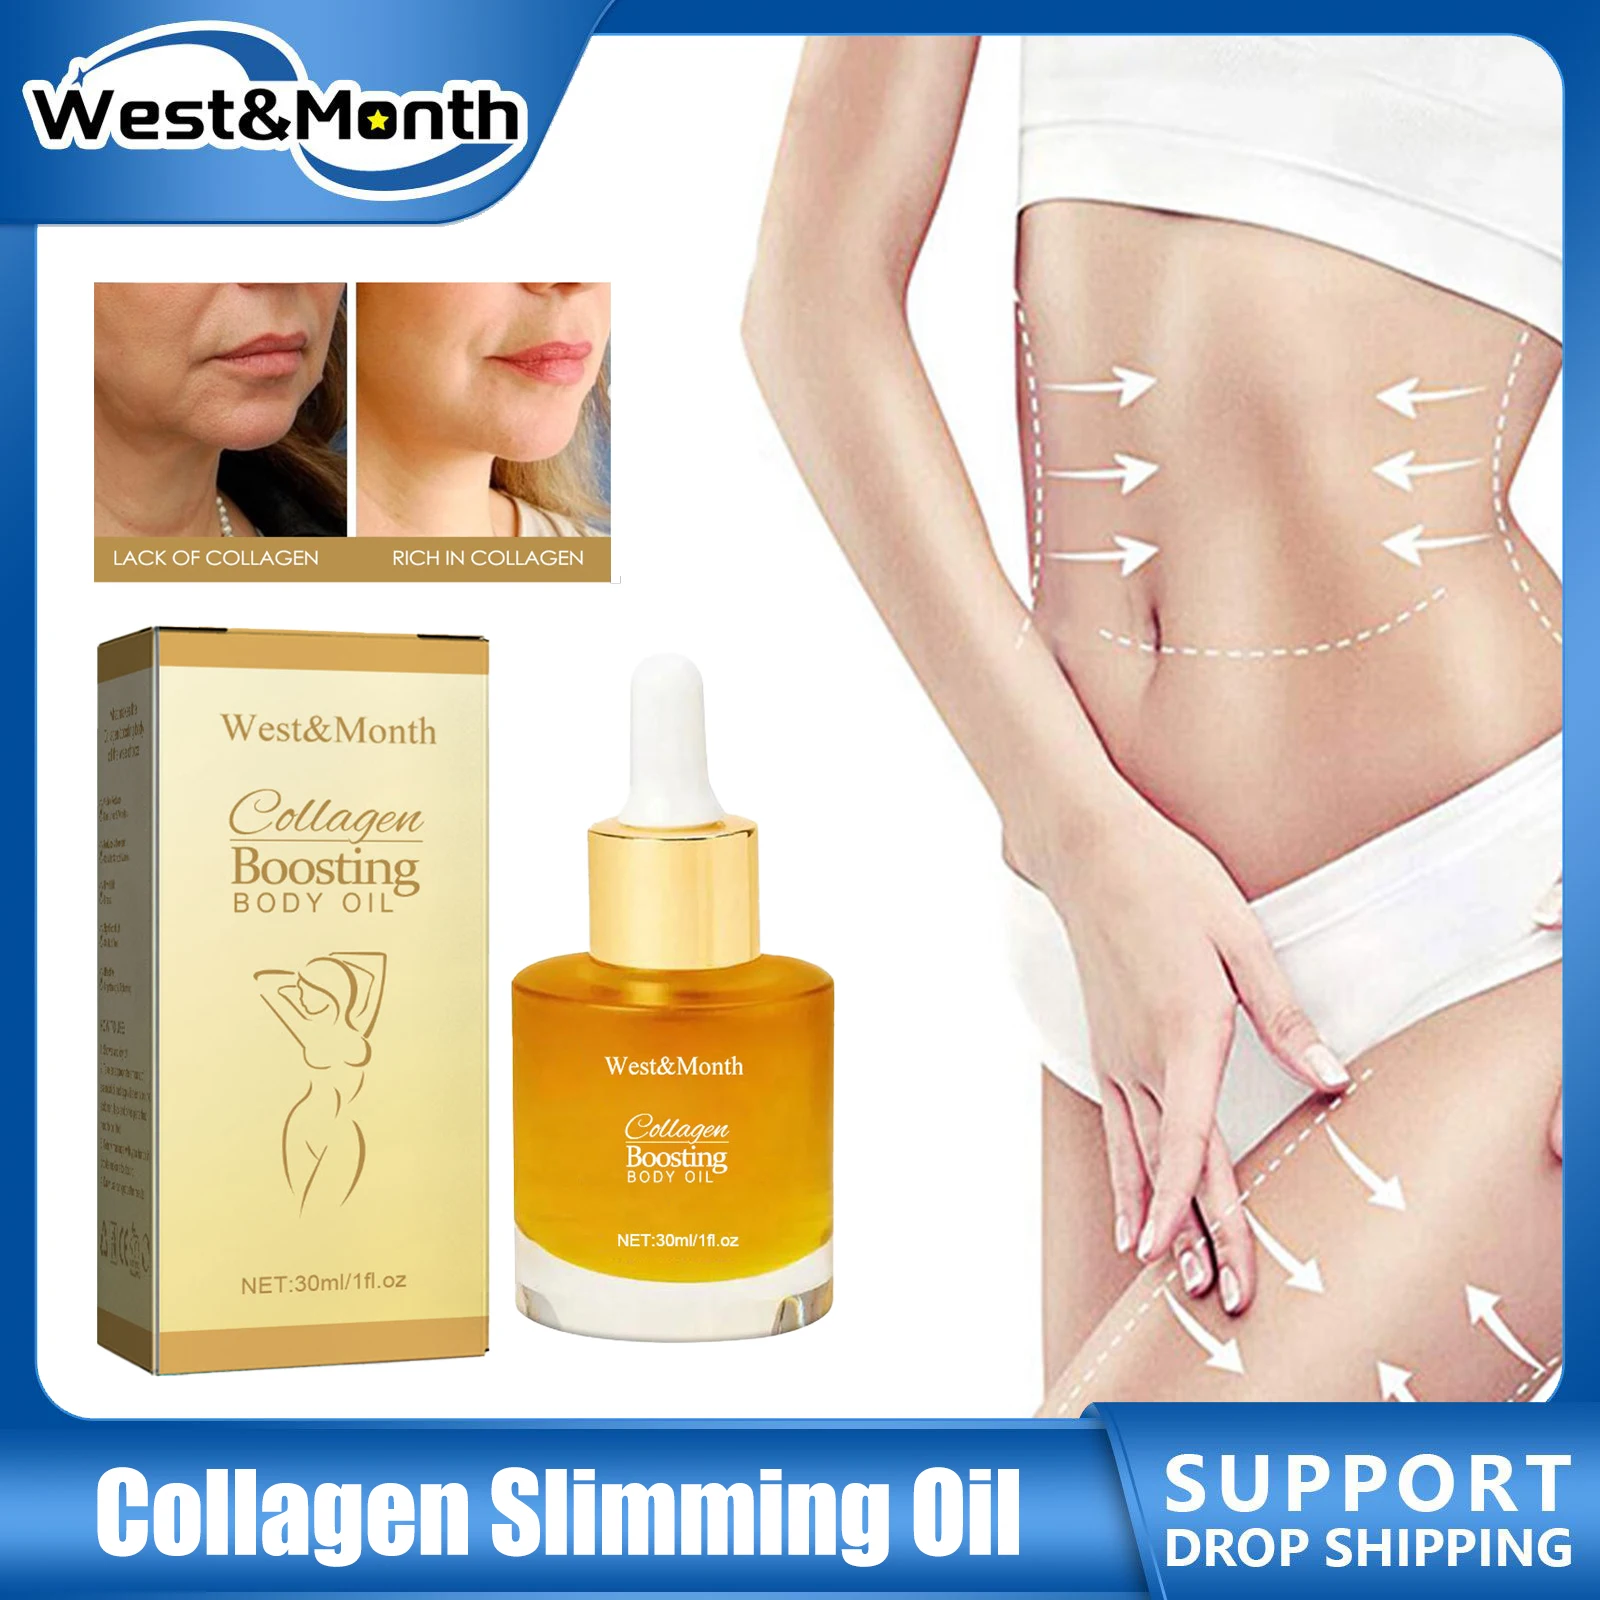 

Collagen Slimming Oil Lifting Firming Belly Fat Burner Remove Cellulite Tighten Breast Buttock Weight Loss Shaping Essence Oil